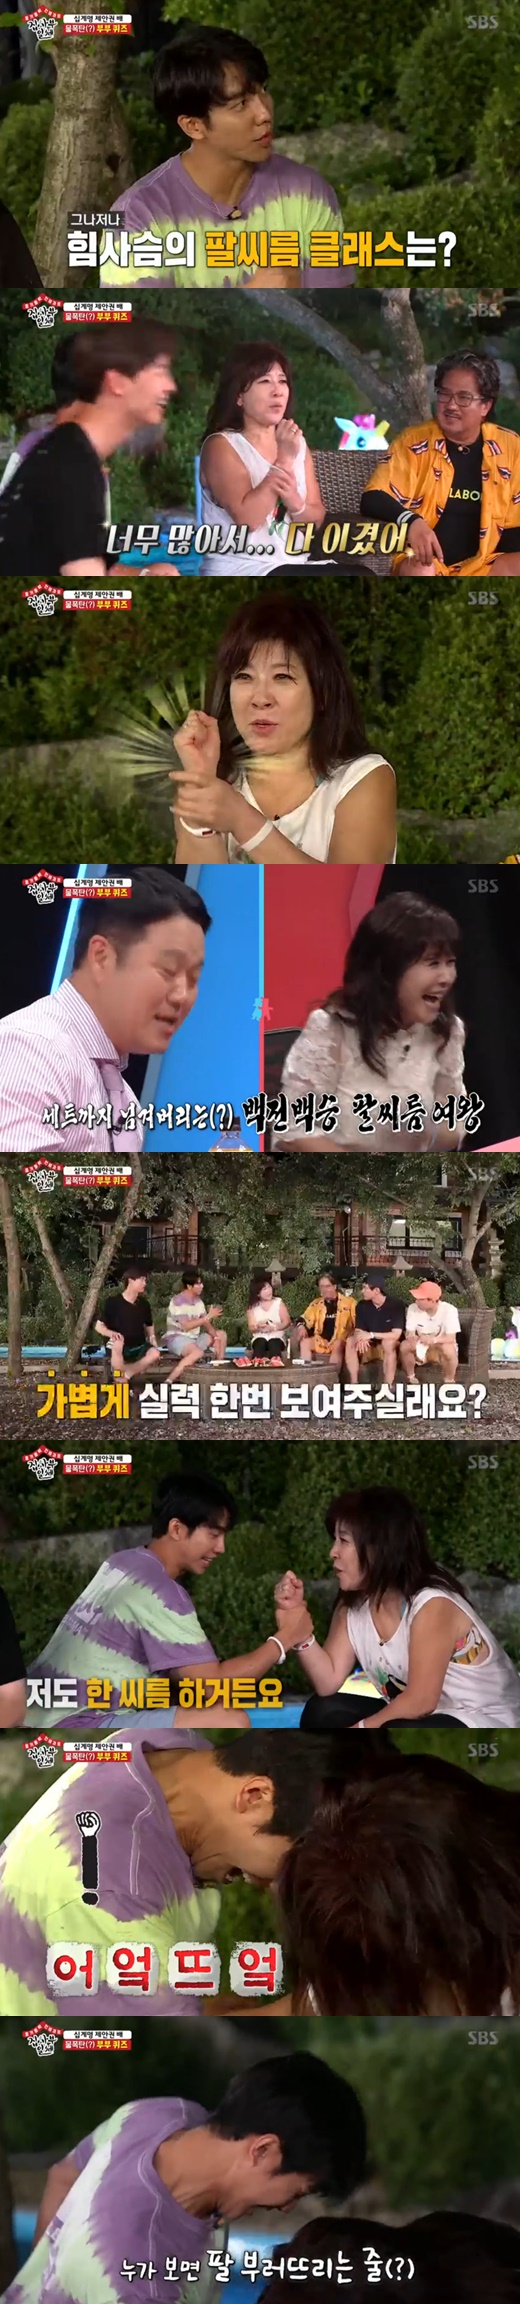 All The Butlers Noh Sa-yeon wins Arm wrestling against Lee Seung-giOn SBS All The Butlers broadcasted on the afternoon of the afternoon, Noh Sa-yeon and Lee Mu-song appeared.Noh Sa-yeon said, I never lost Arm wrestling, and said, I once won Kim Gu.Lee Seung-gi asked Noh Sa-yeon to play Arm wrestling, saying, So can I just taste Arm wrestling?Noh Sa-yeon then started Lee Seung-gi and Arm wrestling, saying, What is it, then taste it. Noh Sa-yeon won the victory.Yang Se-hyeong laughed, saying, How hard did the victory work, I saw a magpie.